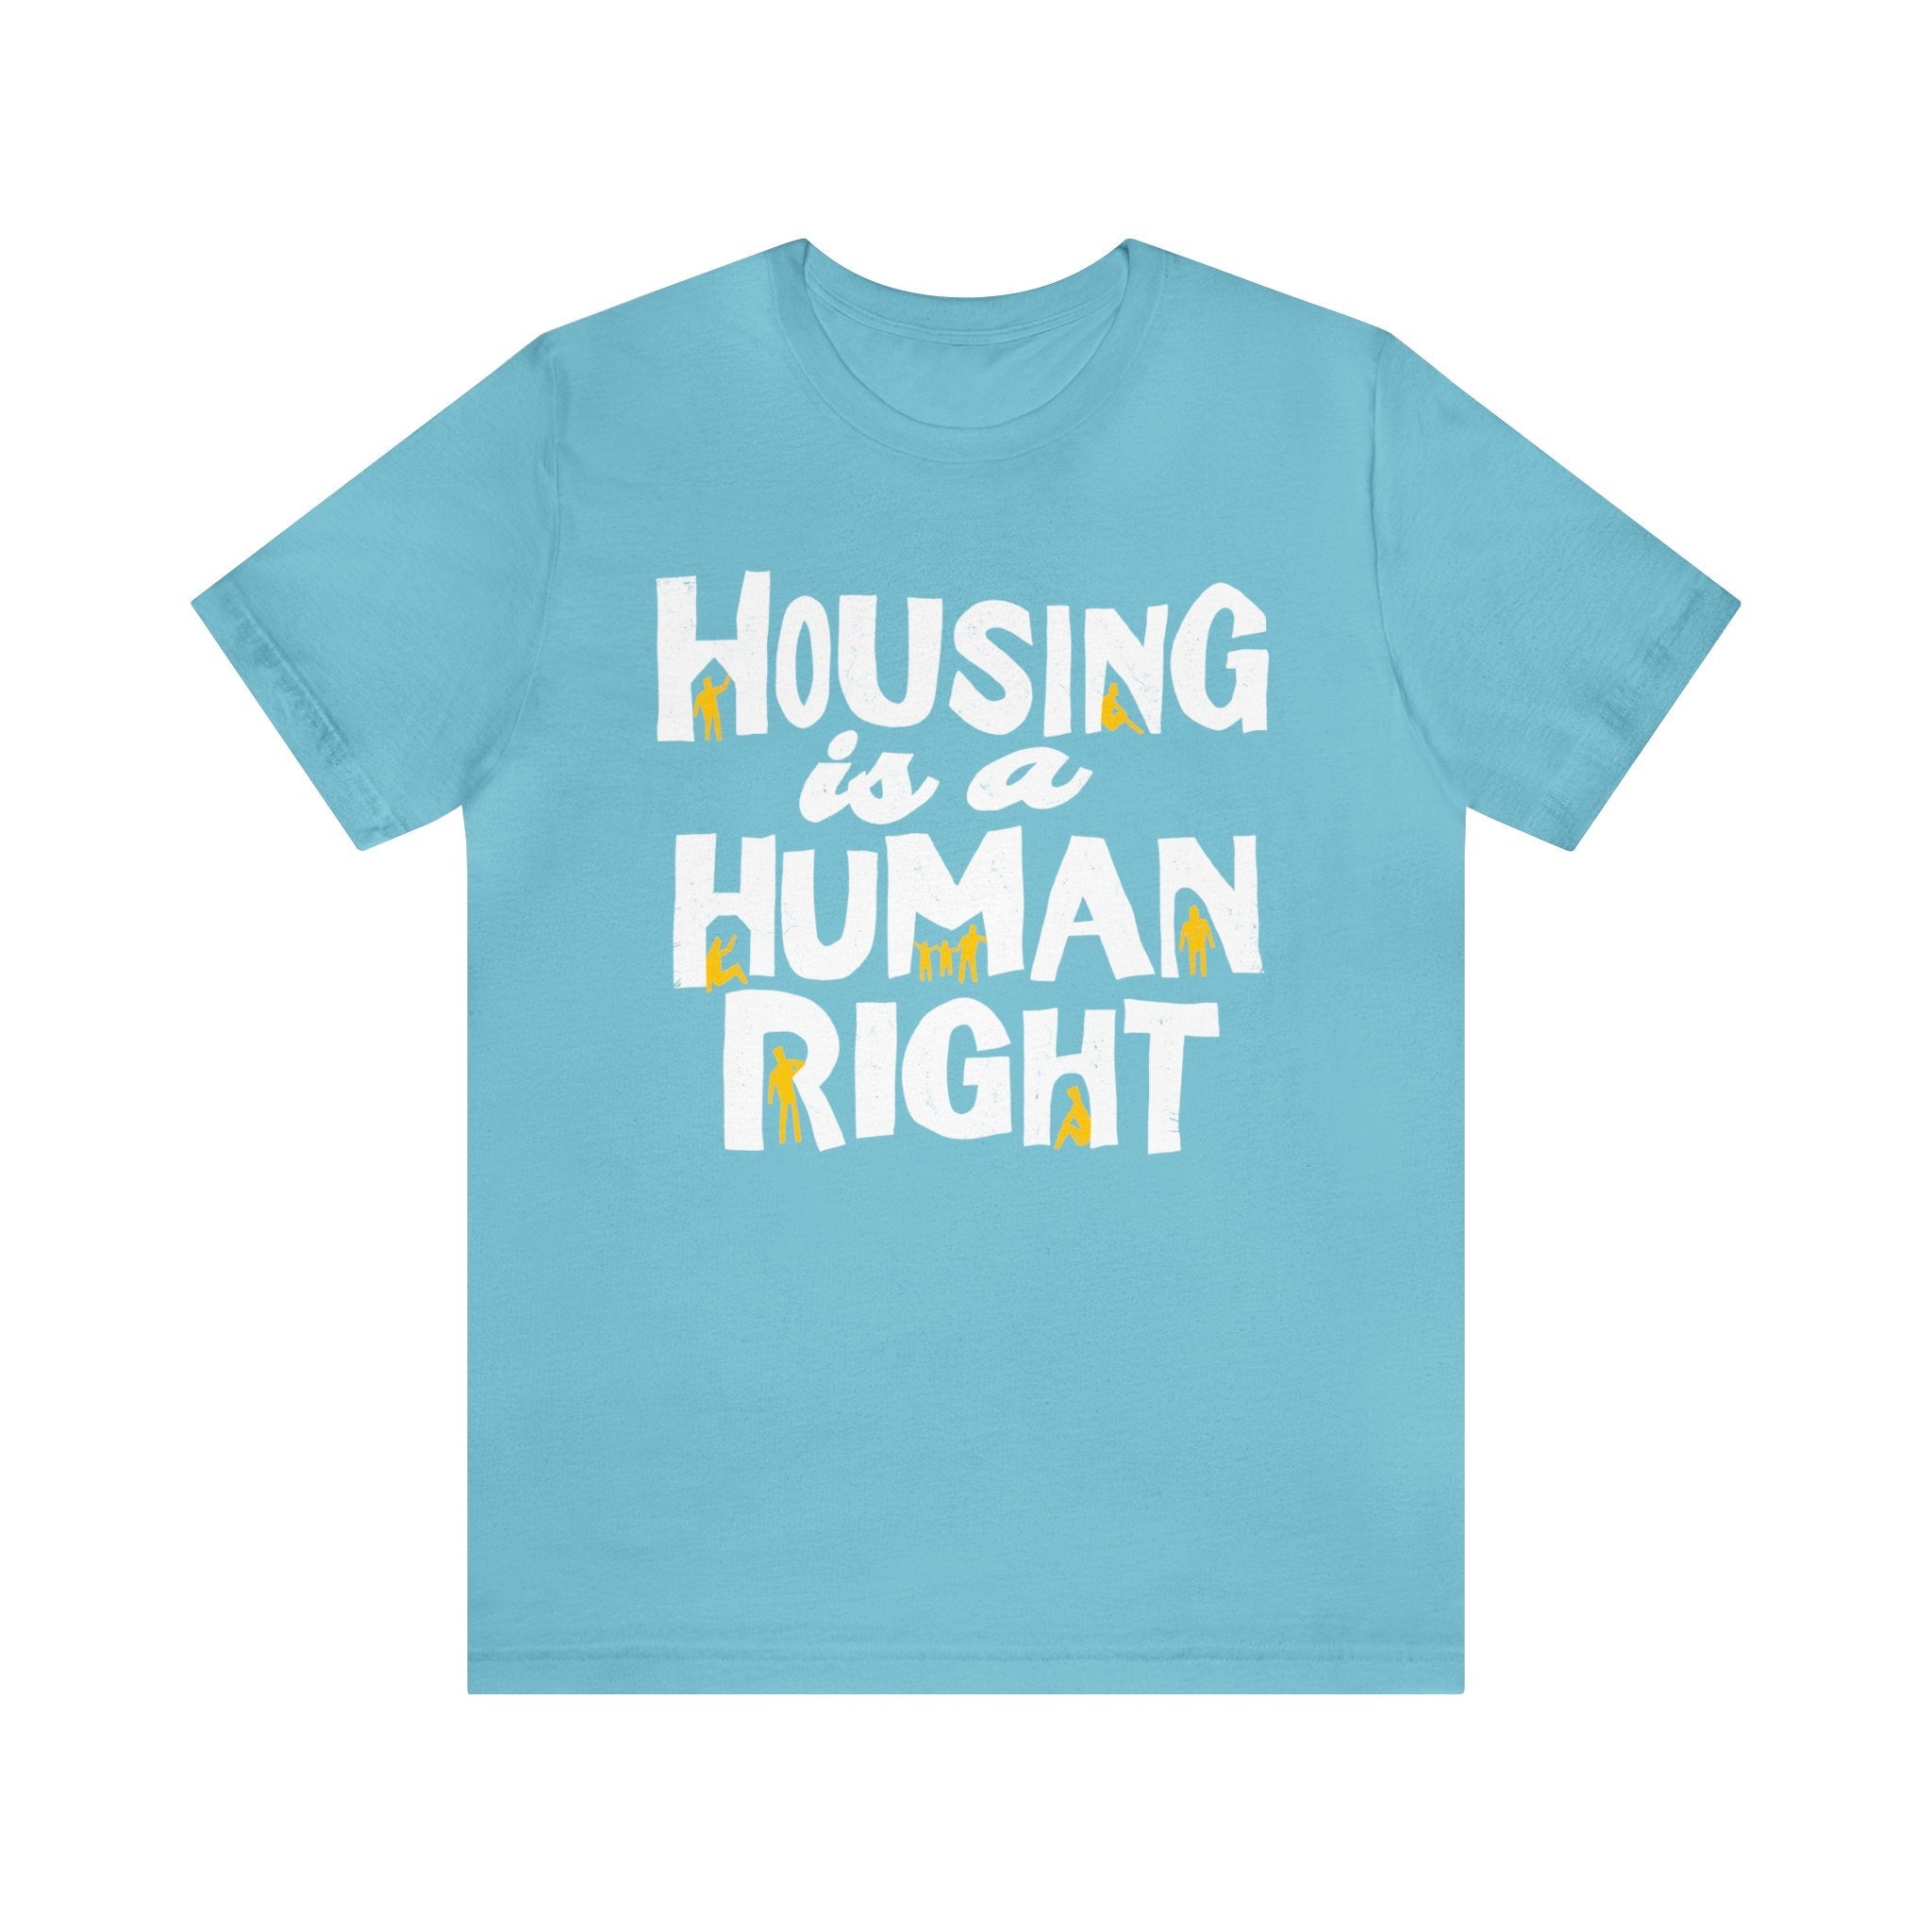 Housing Is A Human Right - Dirty Coast Press